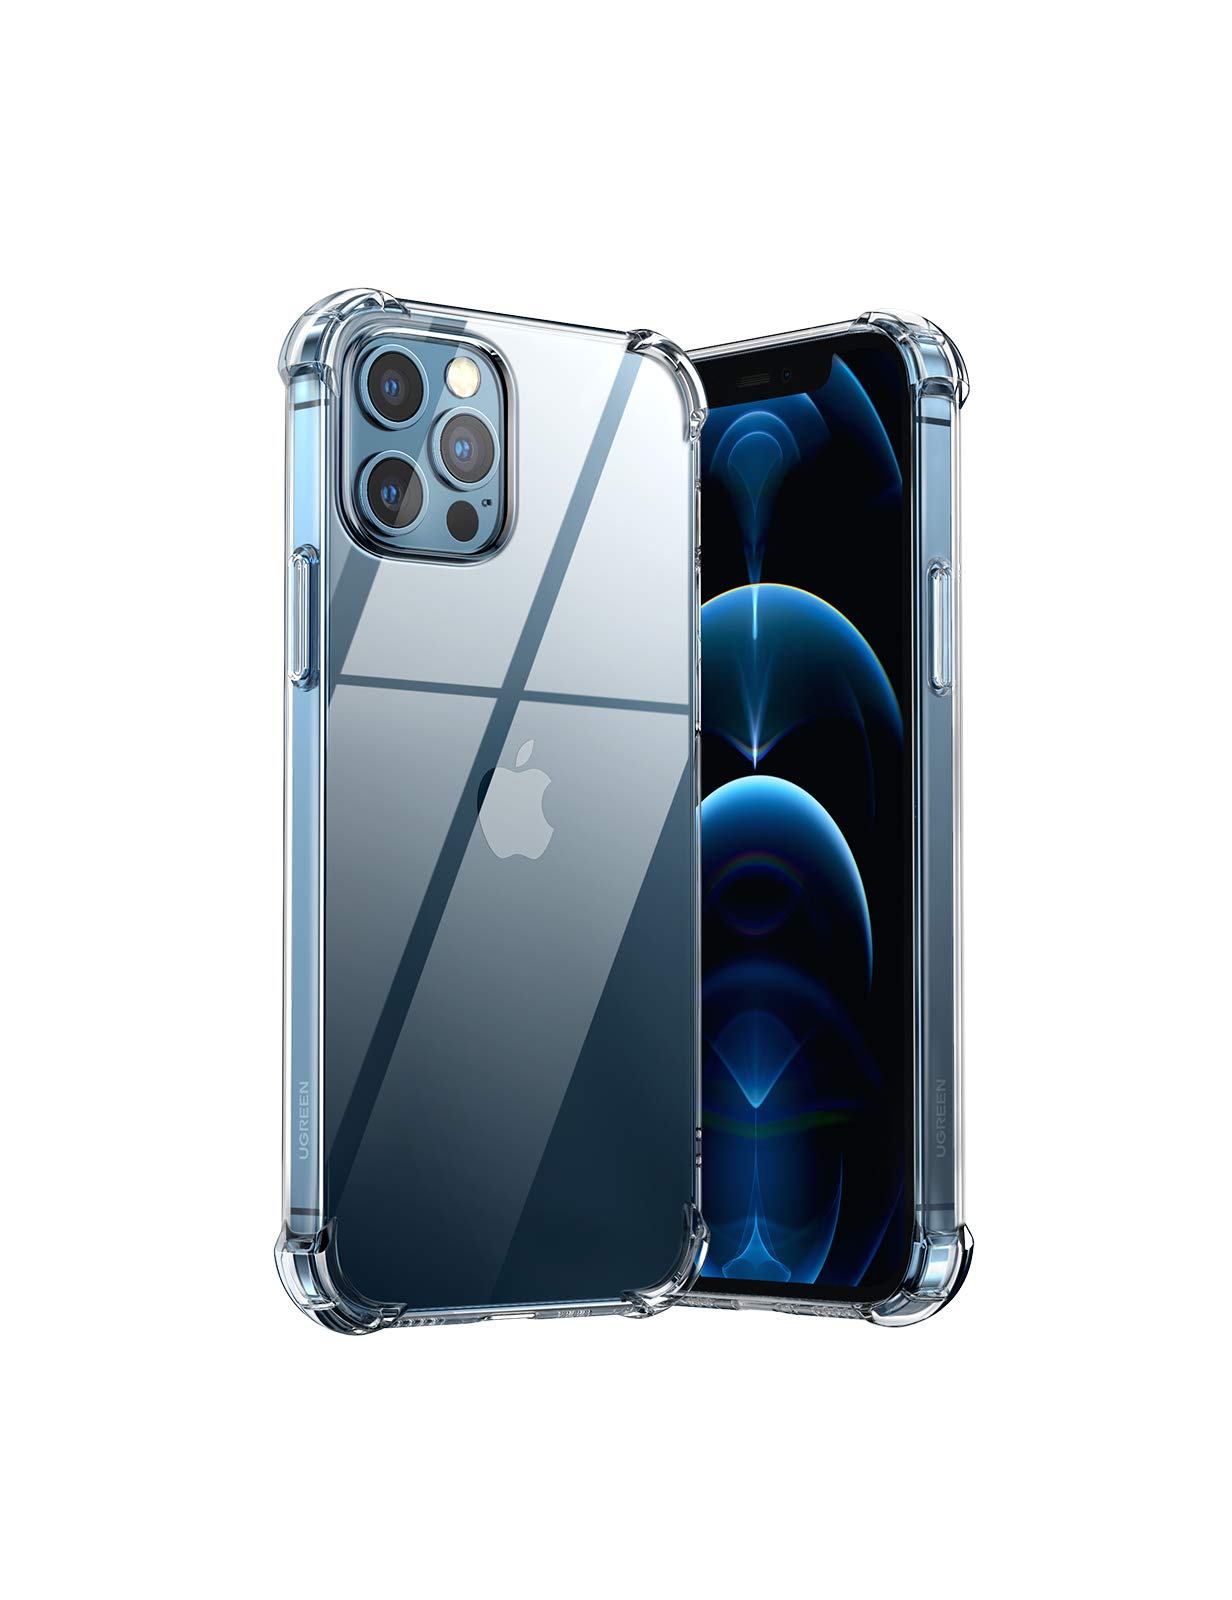 UGREEN Clear iPhone 12 Case, iPhone 12 Pro Case 6.1 inch Ultra Slim Thin Case, TPU Material with 4 Corners Bumper, Shockproof Case Soft Scratch-Resistant Anti-Drop Cell Phone Cover For iPhone 12/12Pro